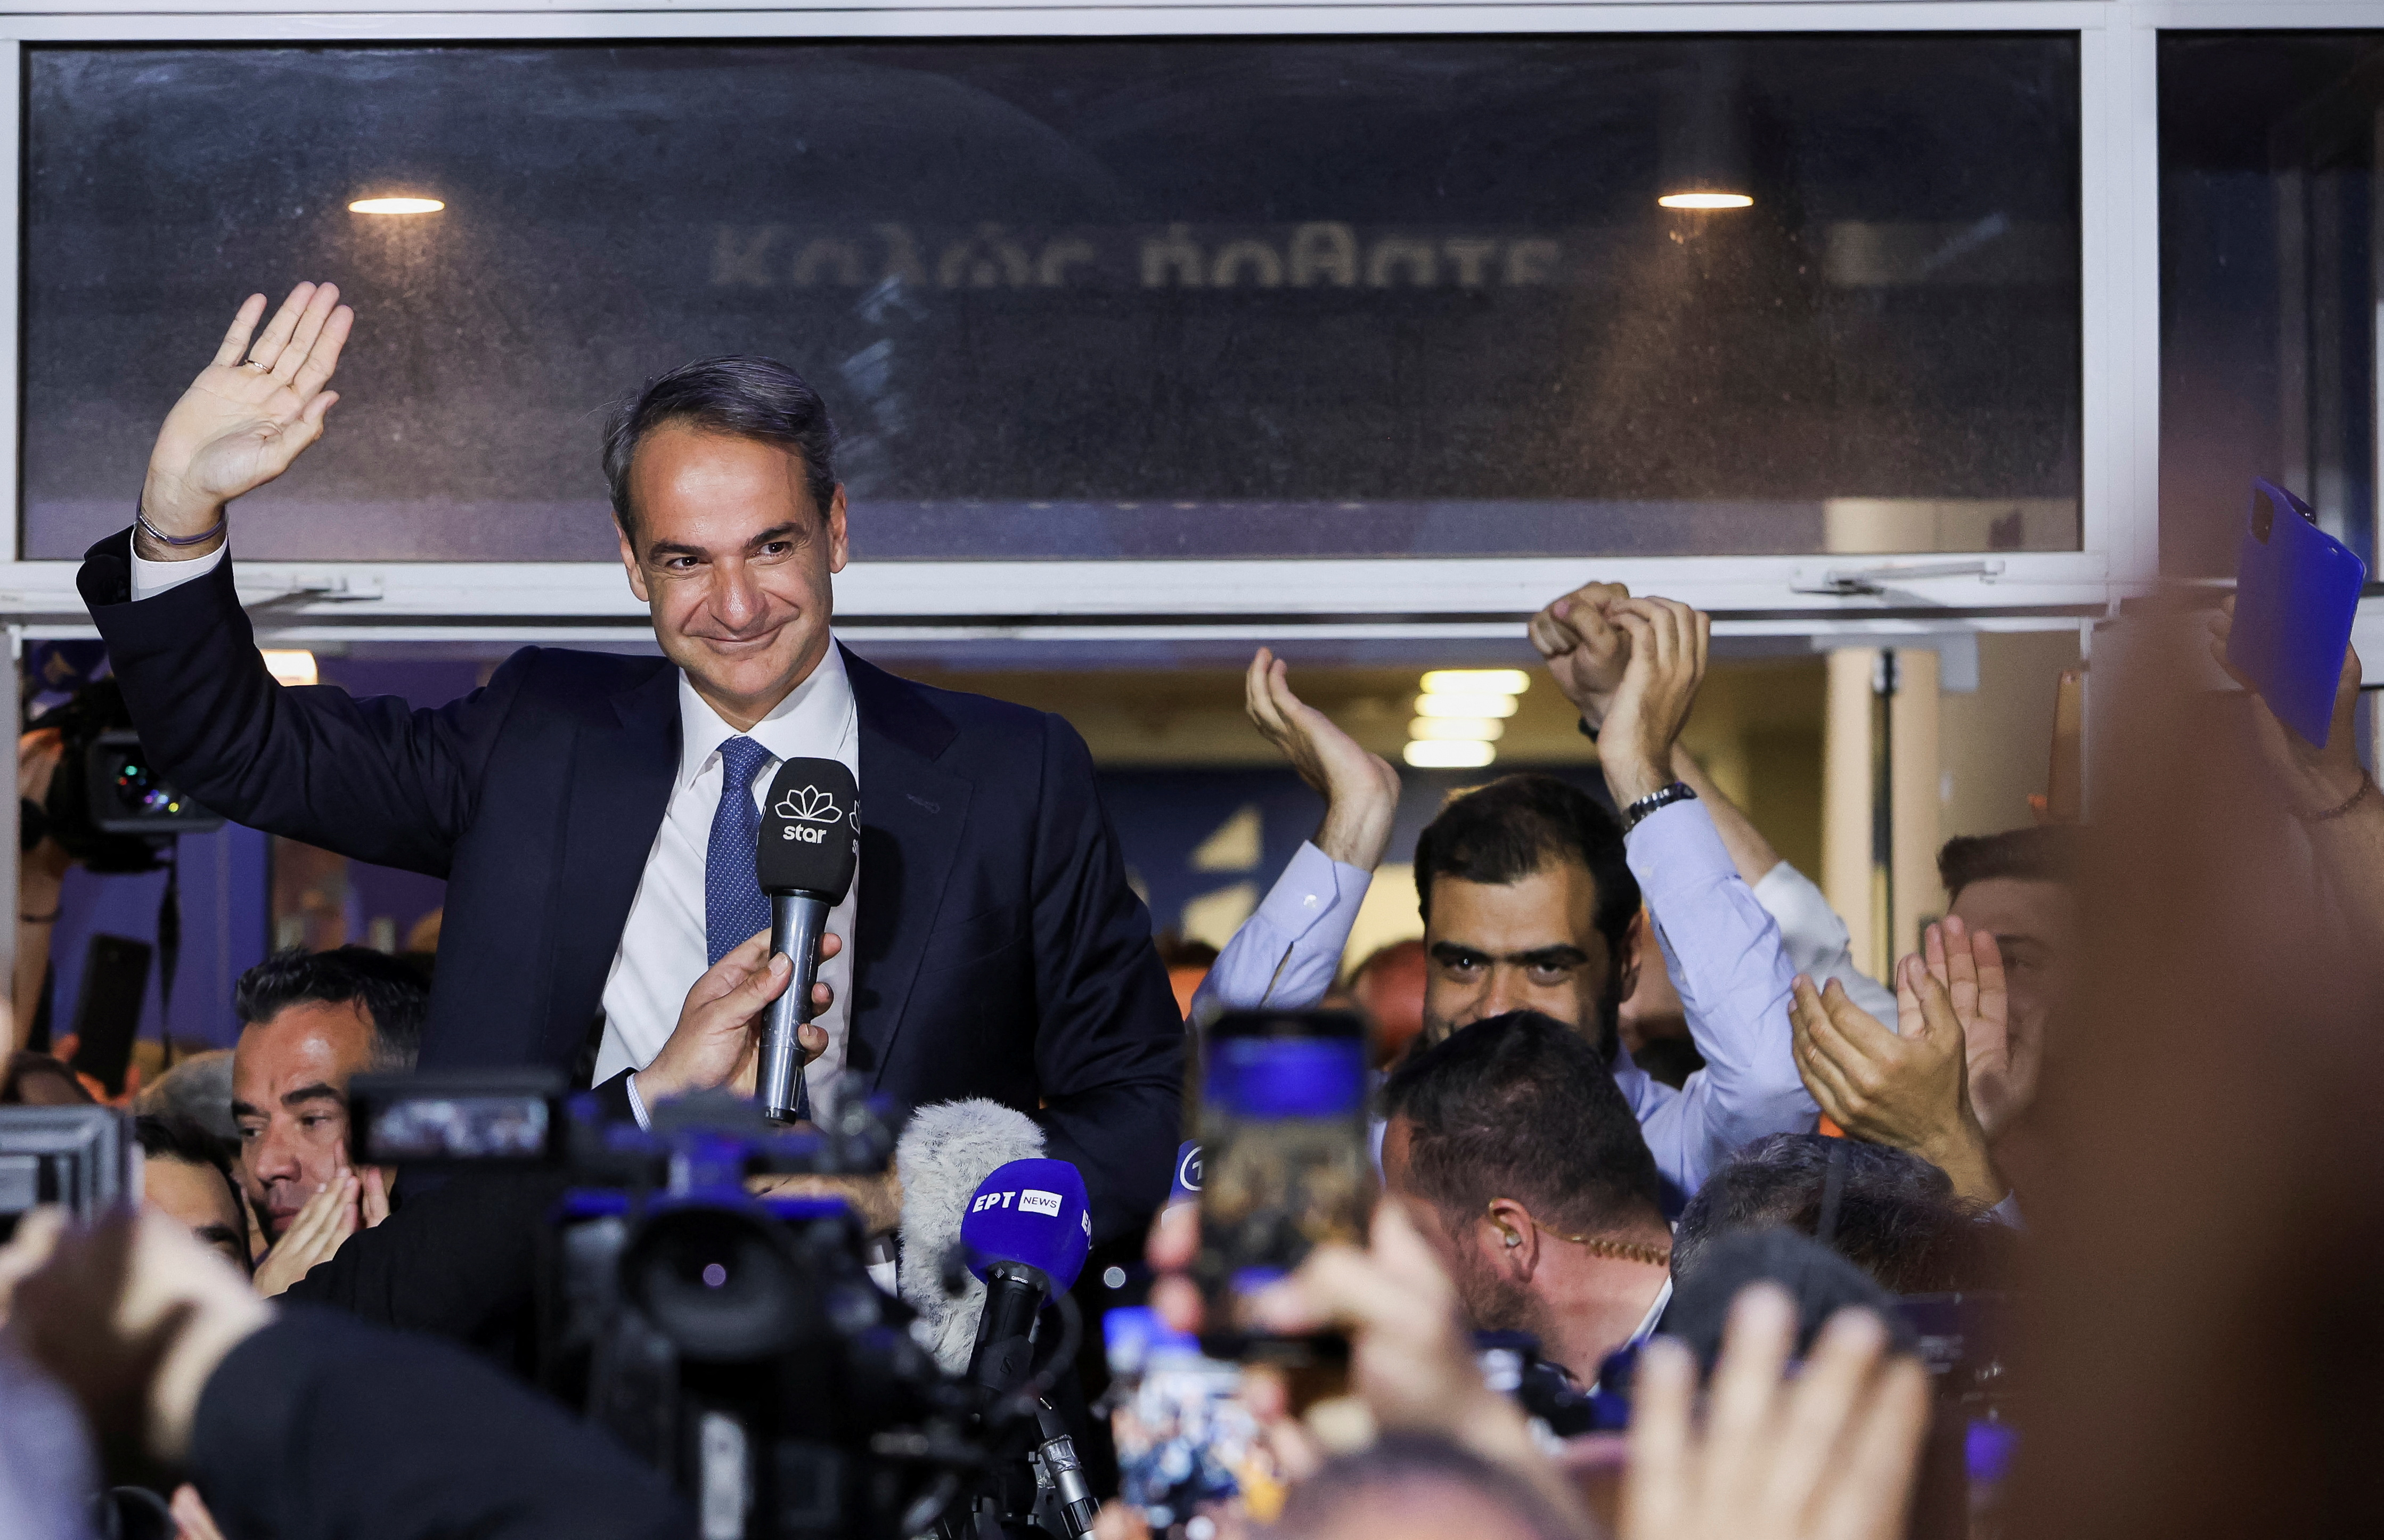 image After no outright victory, Greek PM to get mandate for coalition